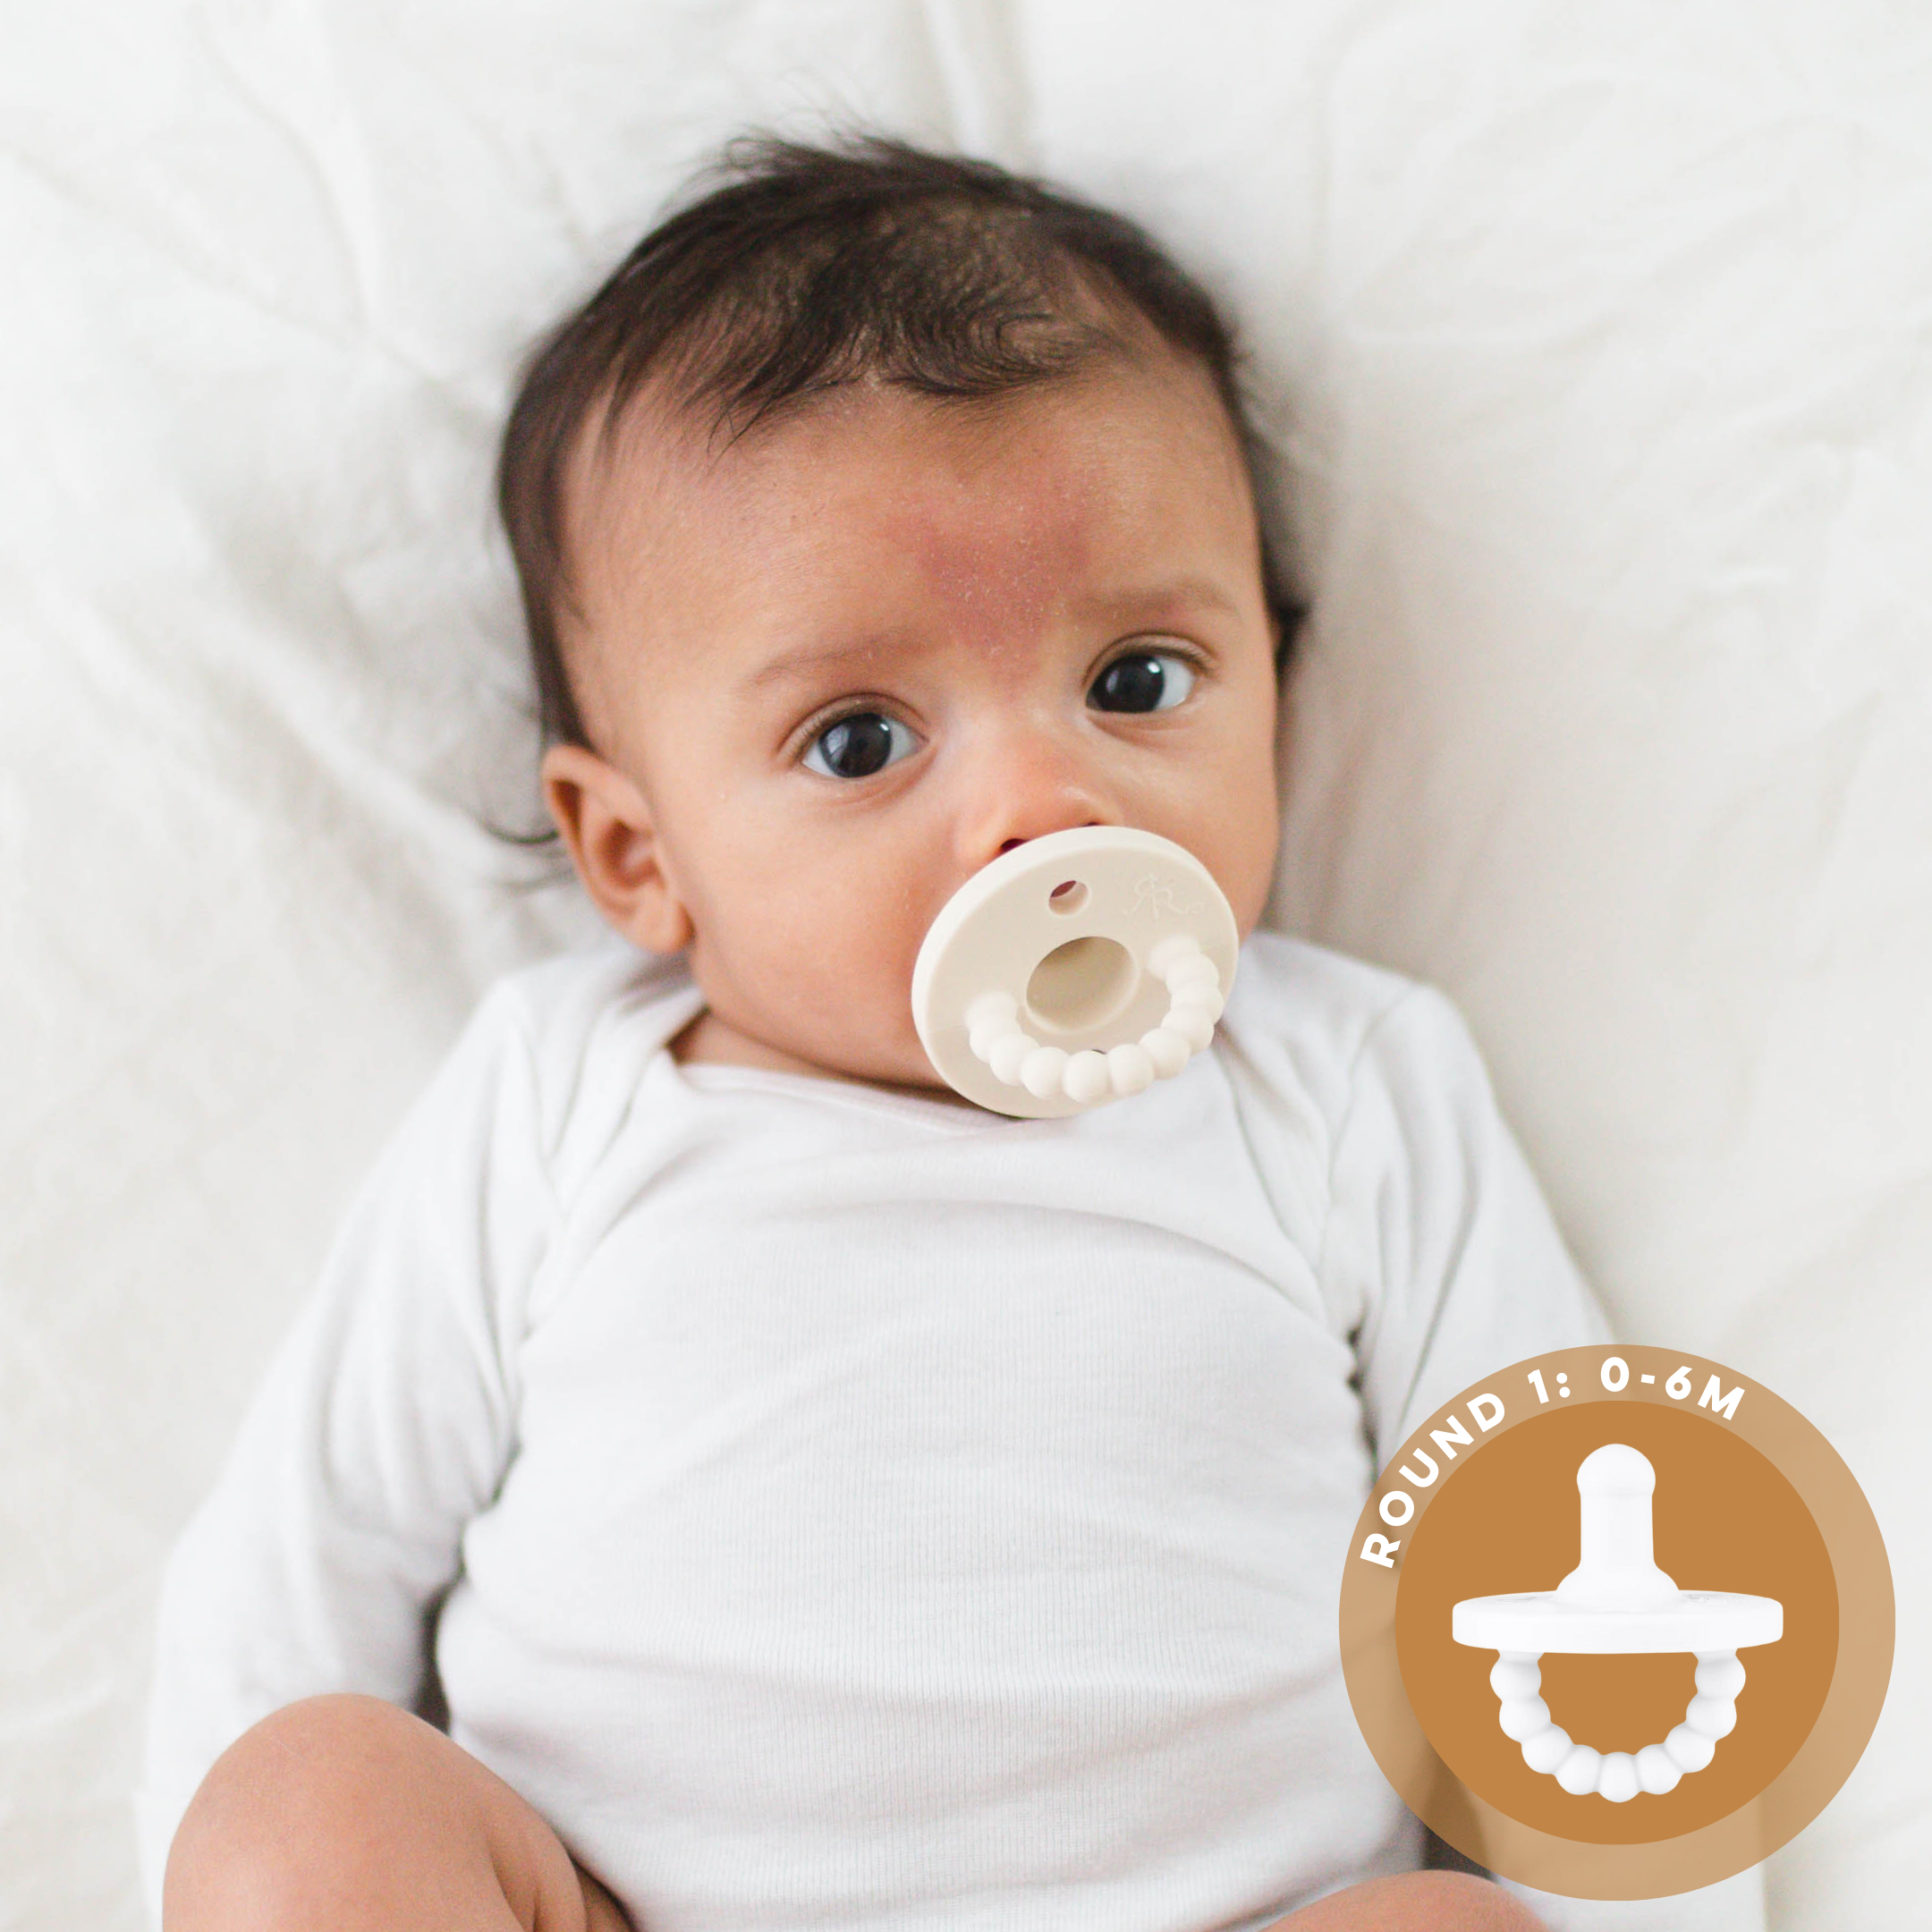 Baby with Round 1 pacifier 